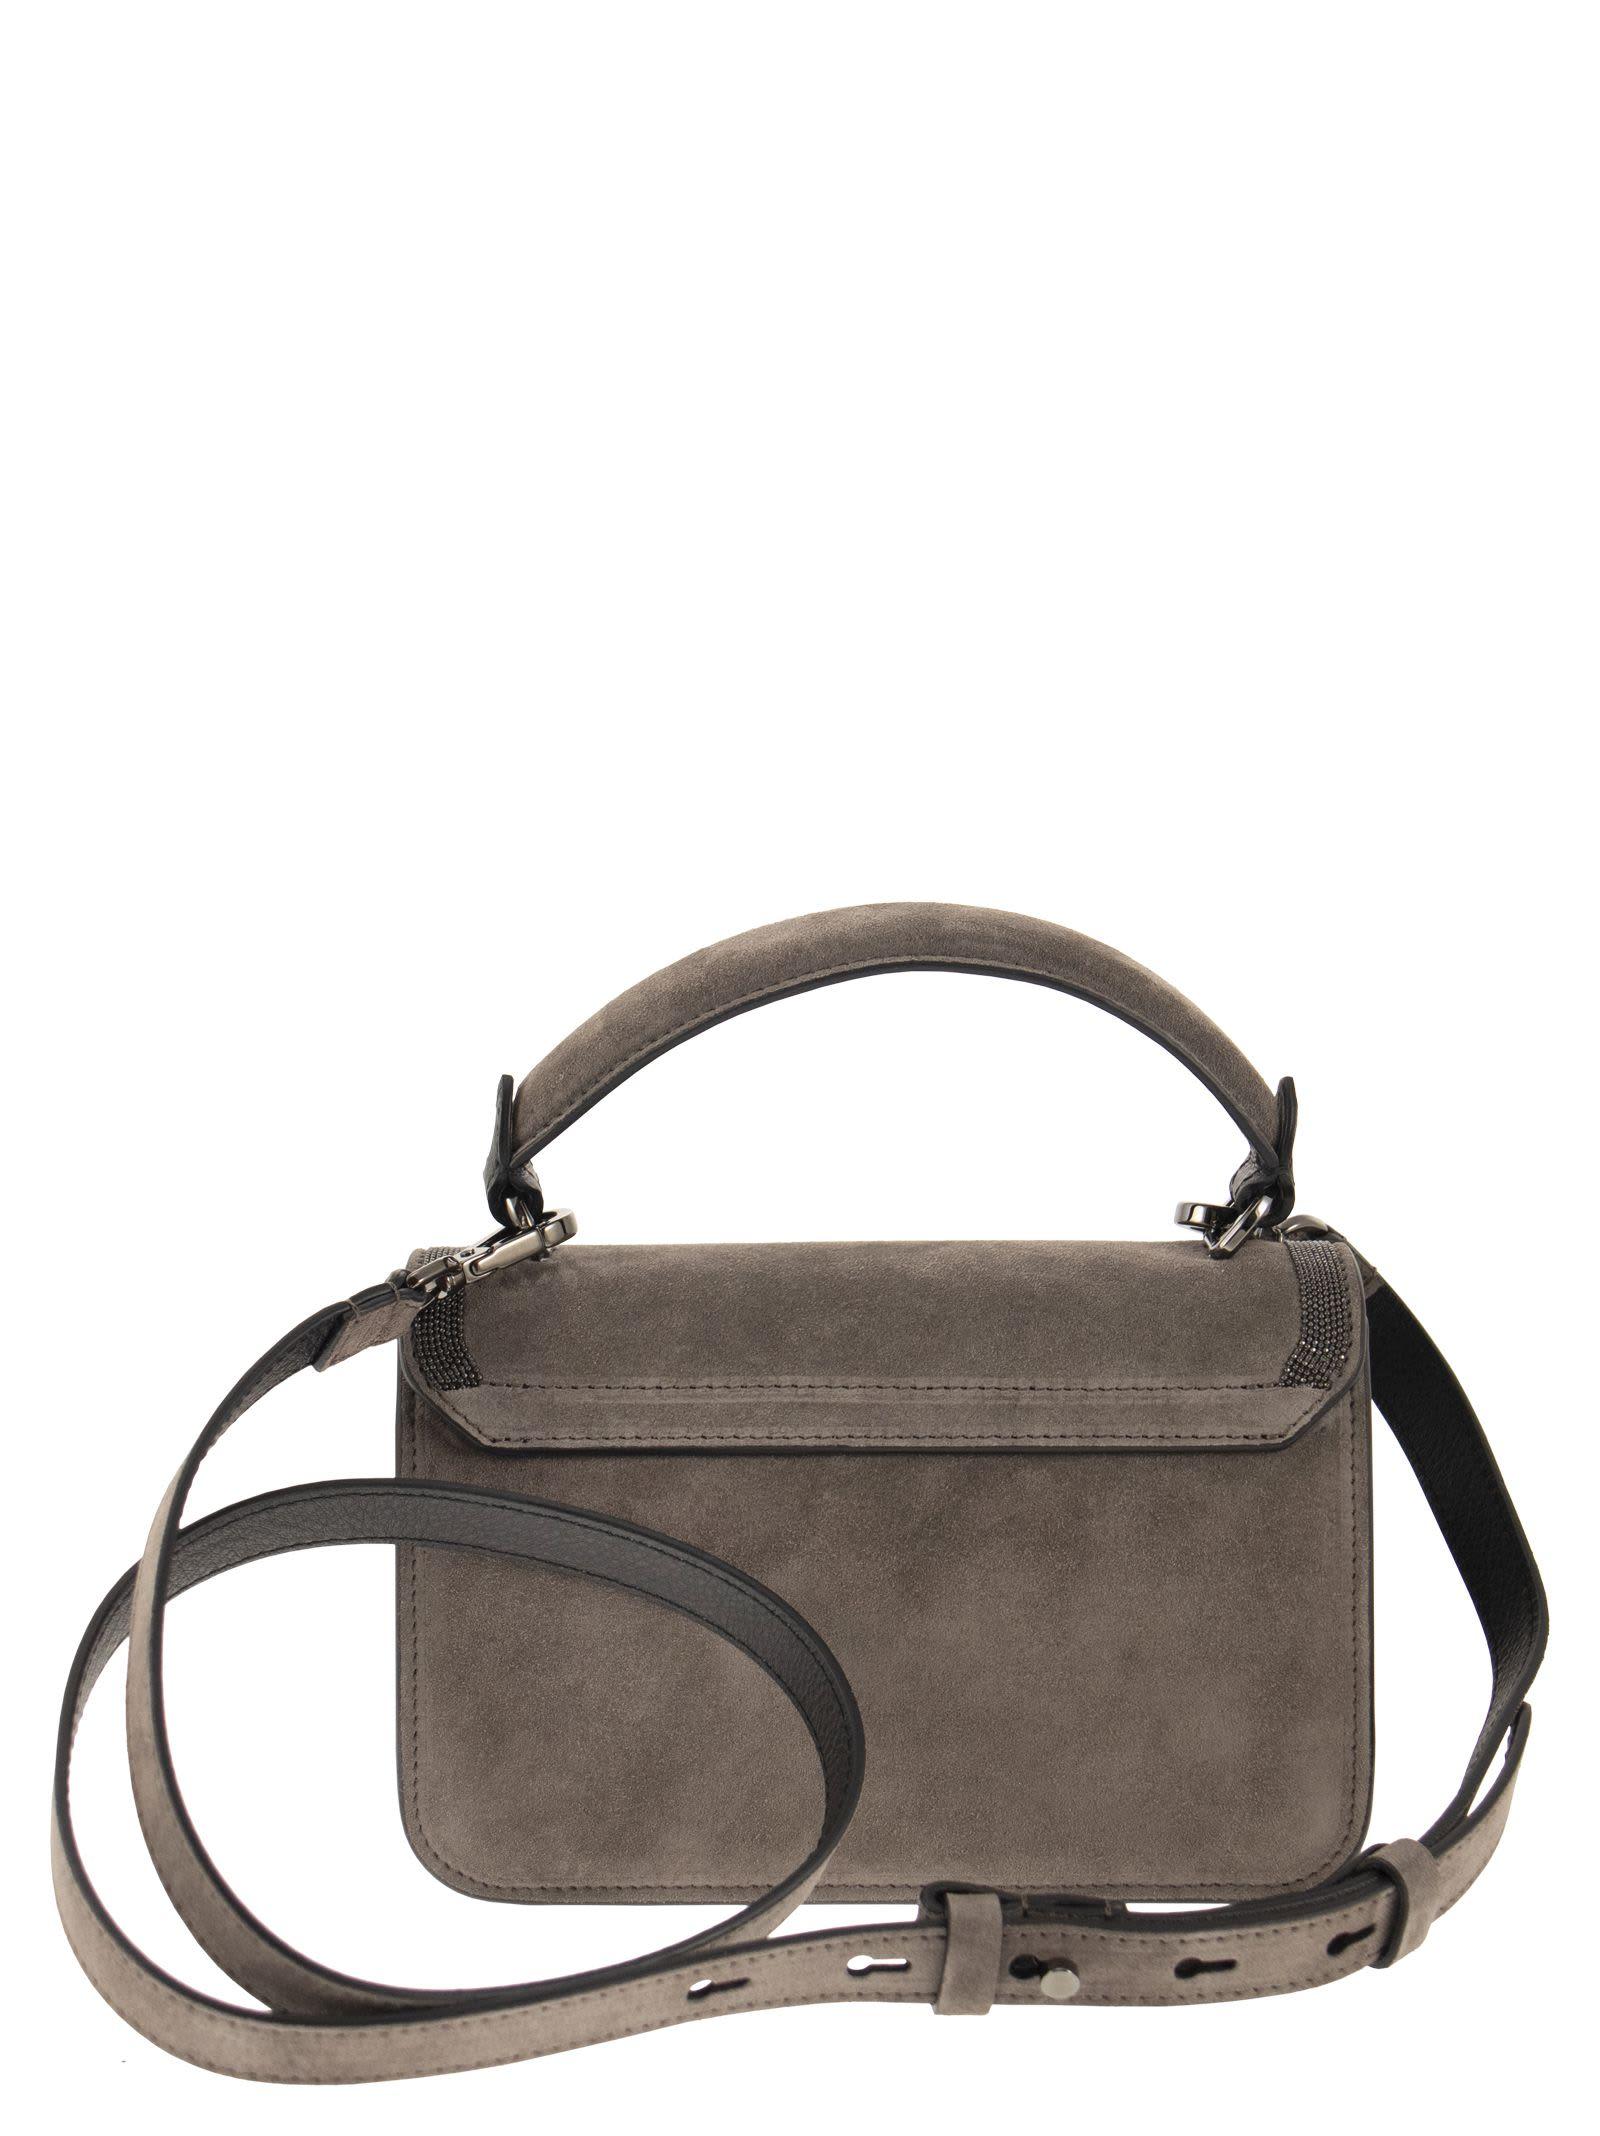 Brunello Cucinelli Suede Bag With Precious Contour in Brown | Lyst